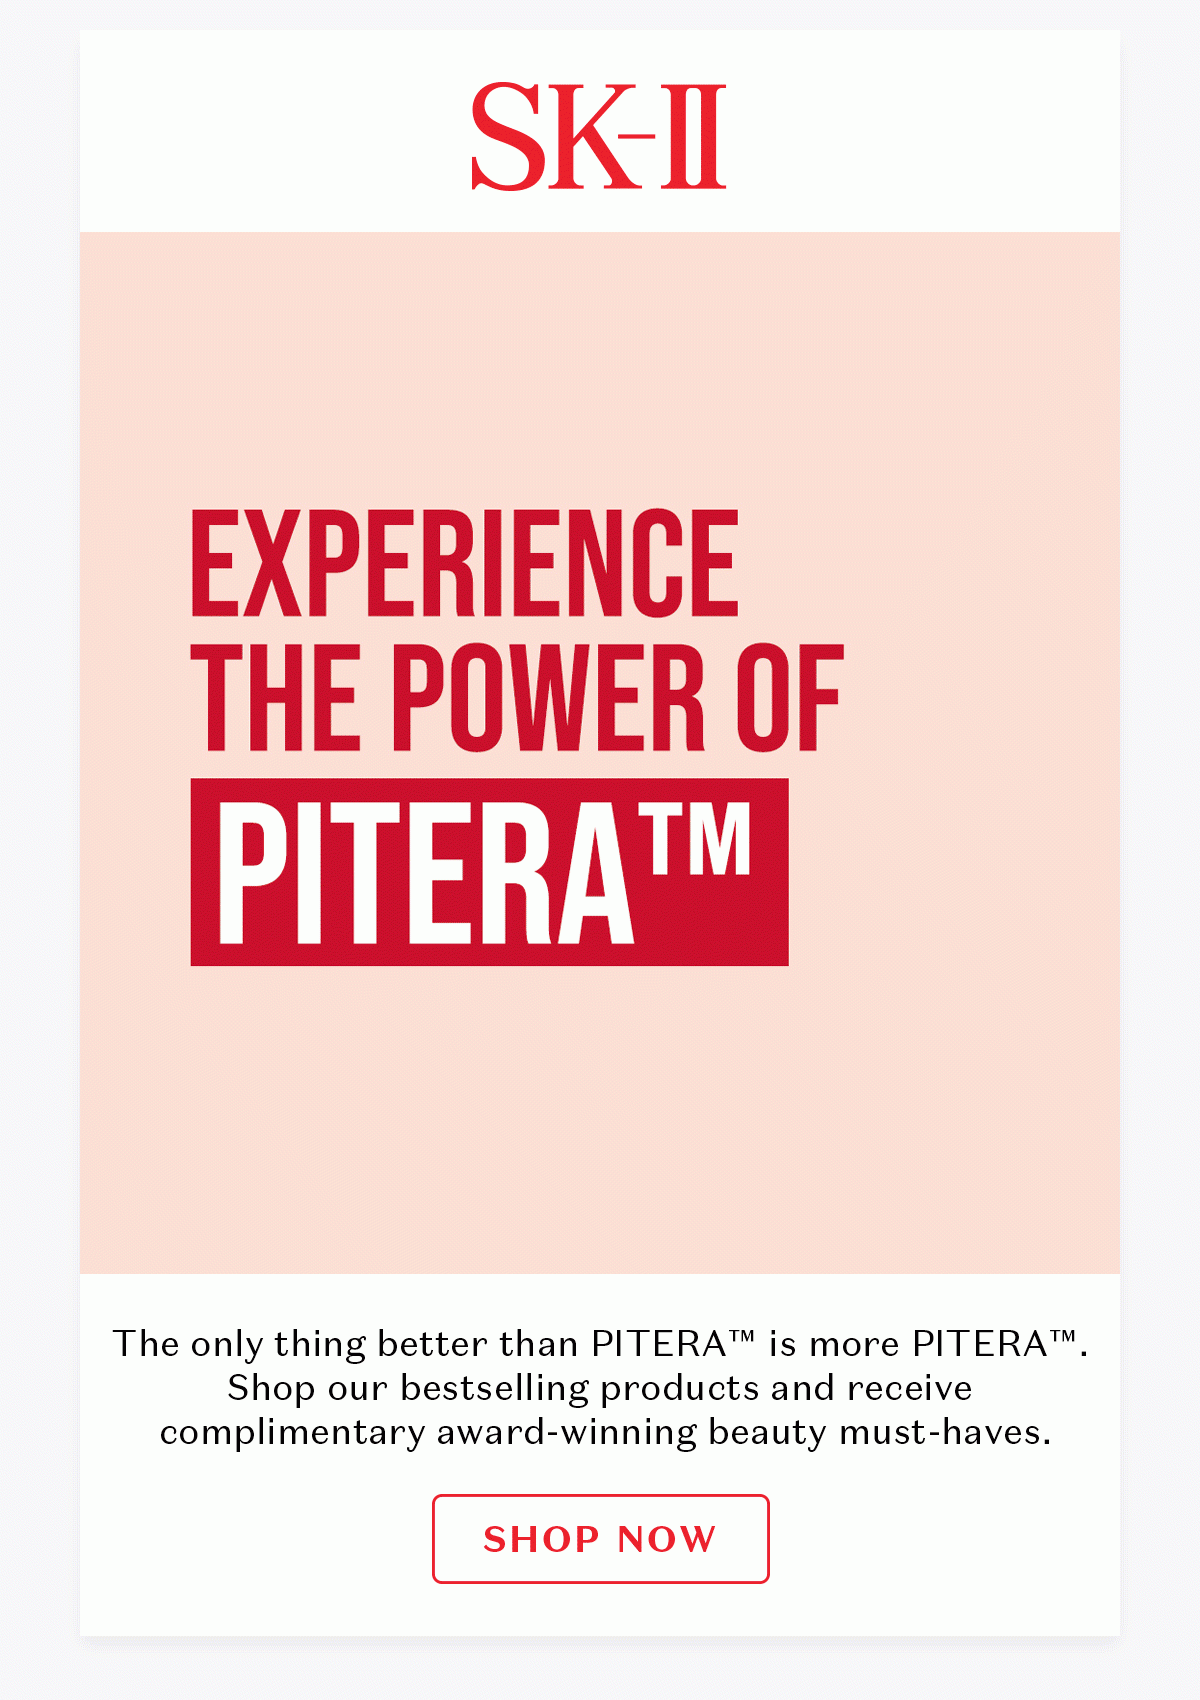 Experience the Power of PITERA - SHOP NOW